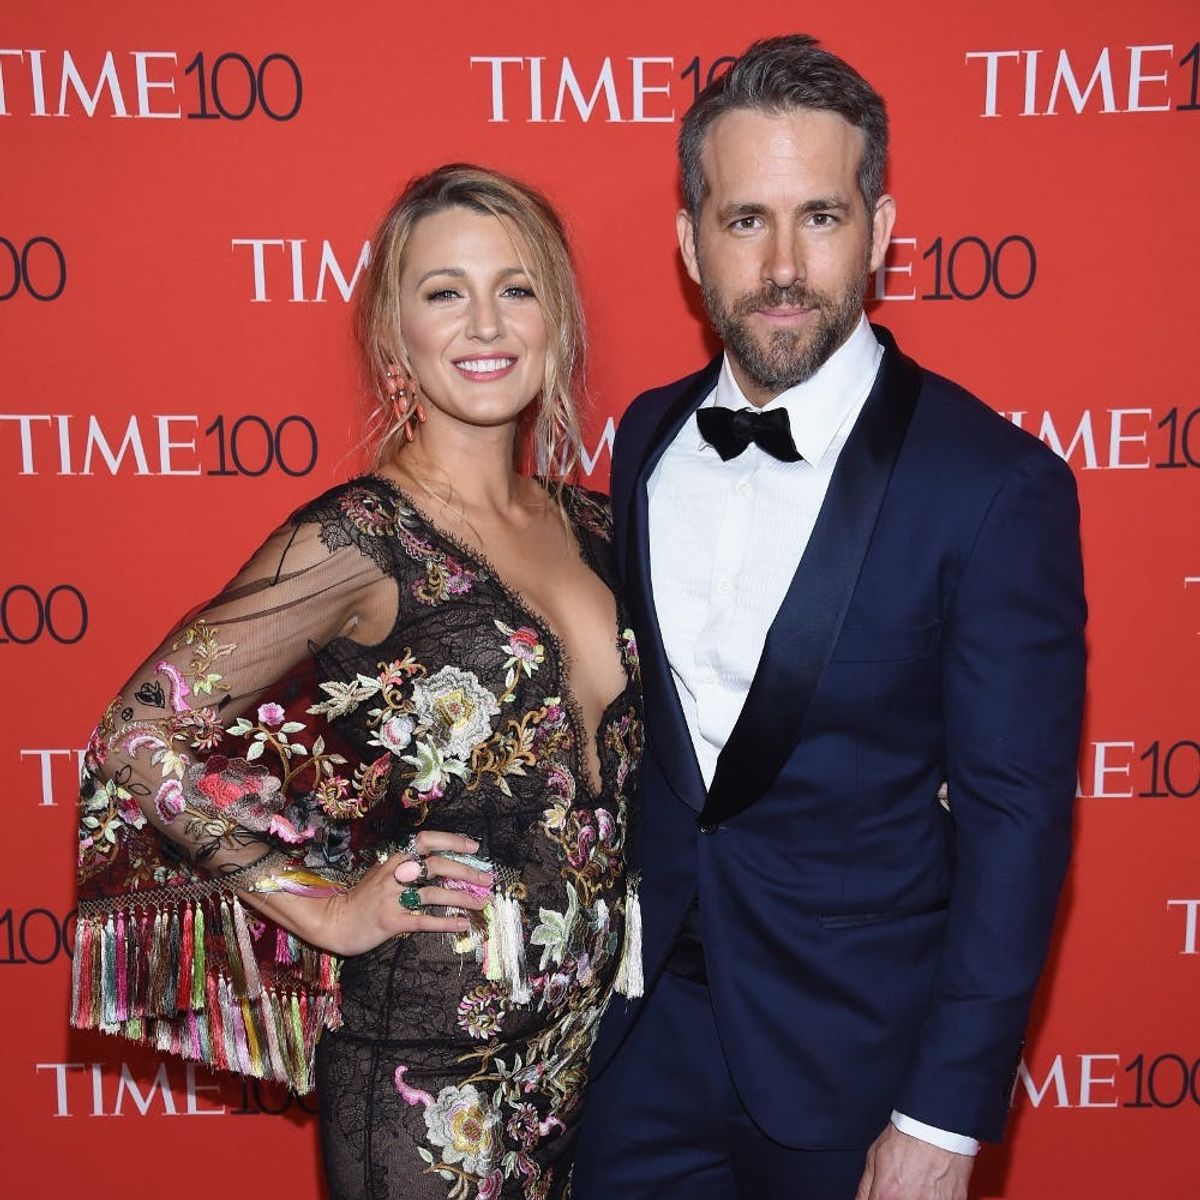 Blake Lively Perfectly Trolled Hubby Ryan Reynolds for His Time 100 Honor